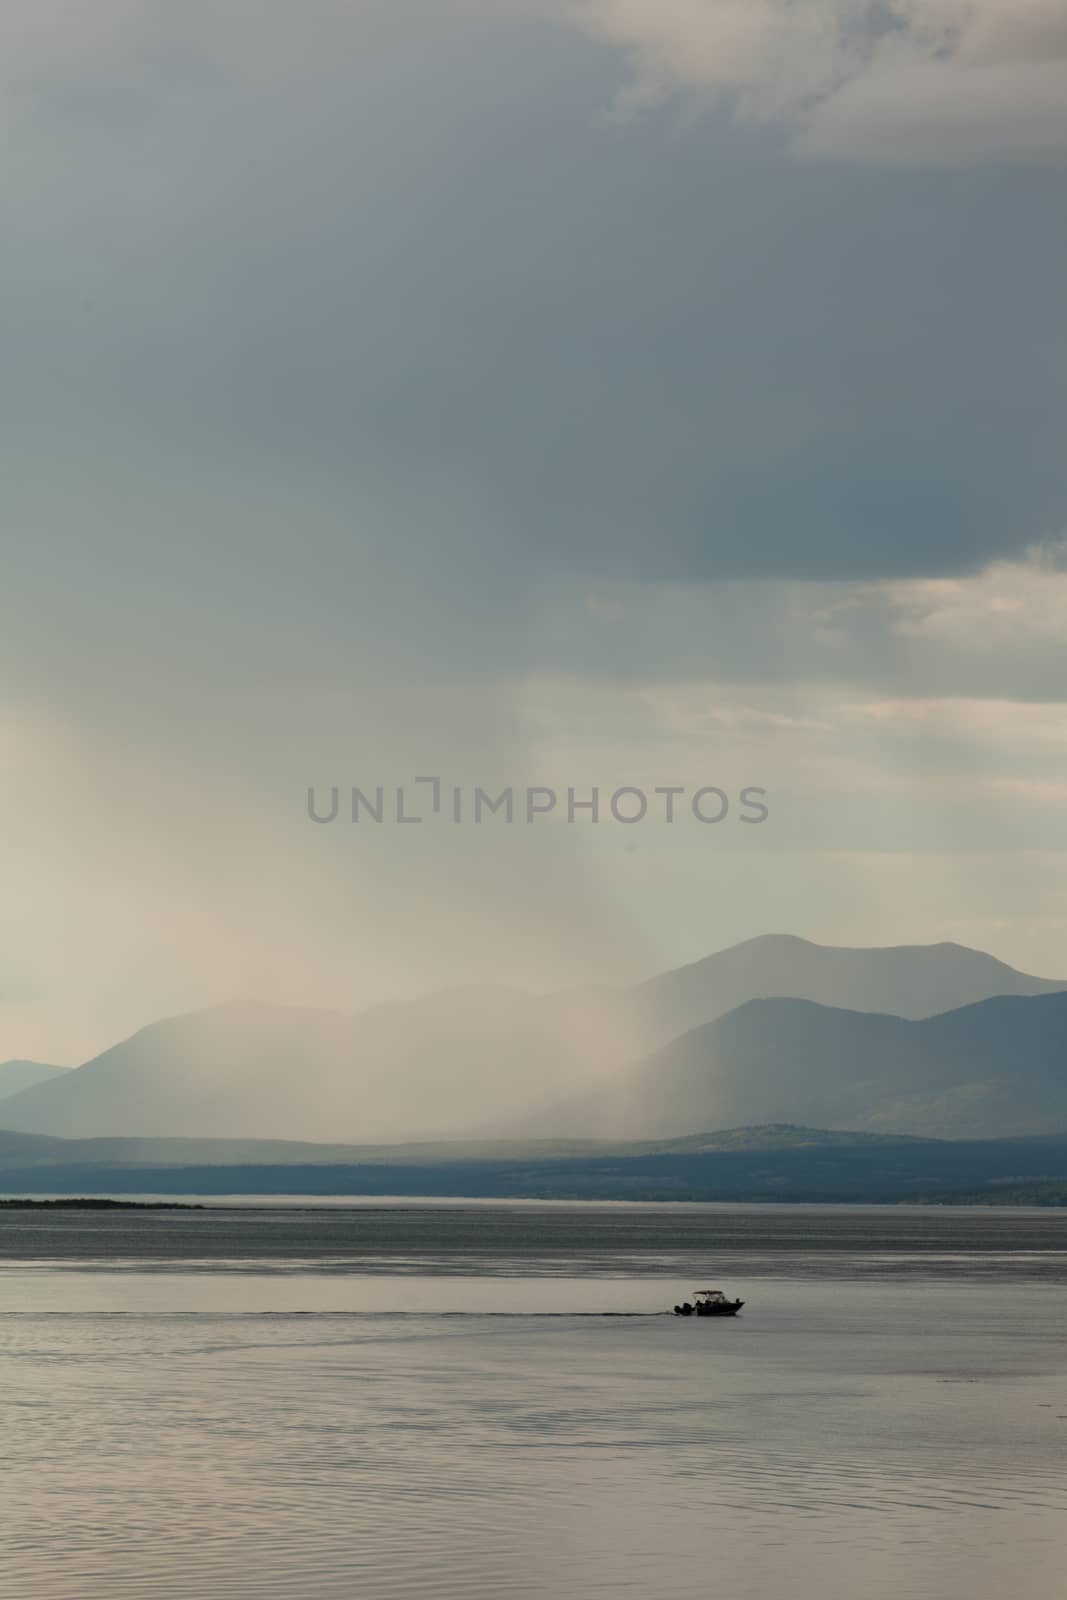 Heavy rain shower over Marsh Lake Yukon Territory Canada and distant mountain range with a small motorboat out on tranquil water